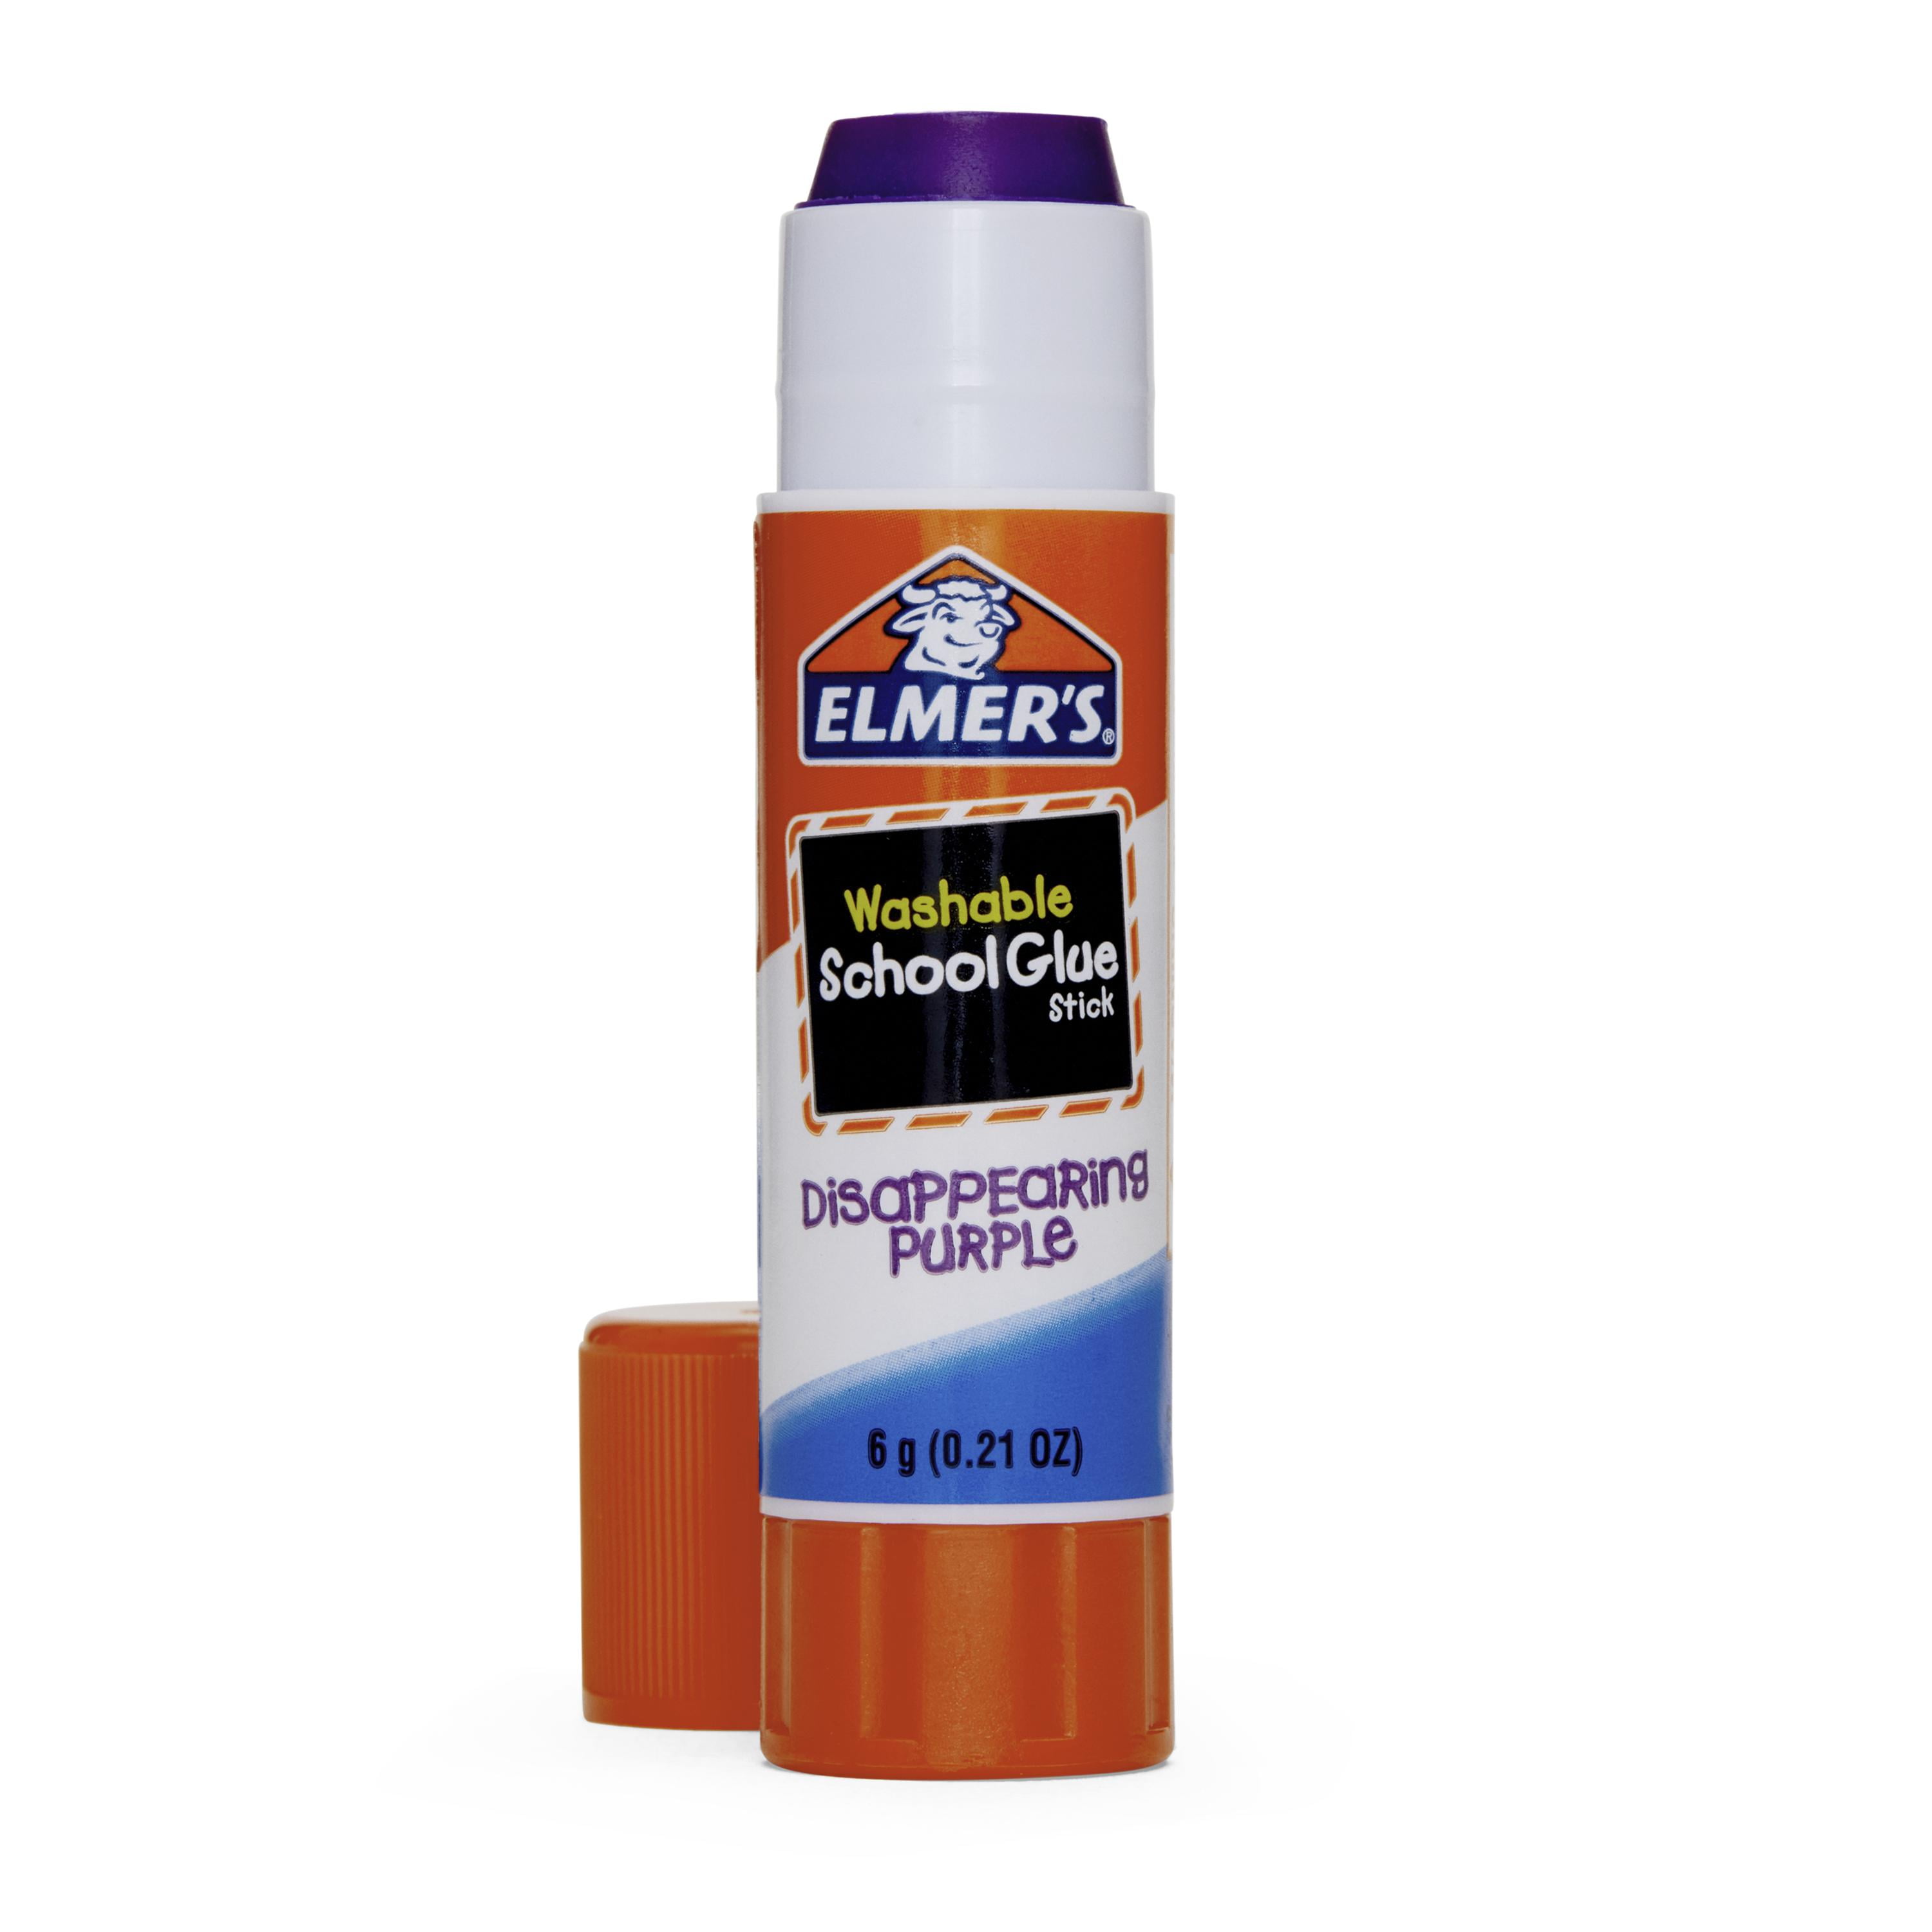  Elmer's Washable Glue Sticks 60 Count Pack Only $11.69 Shipped  (Just 19¢ Each)